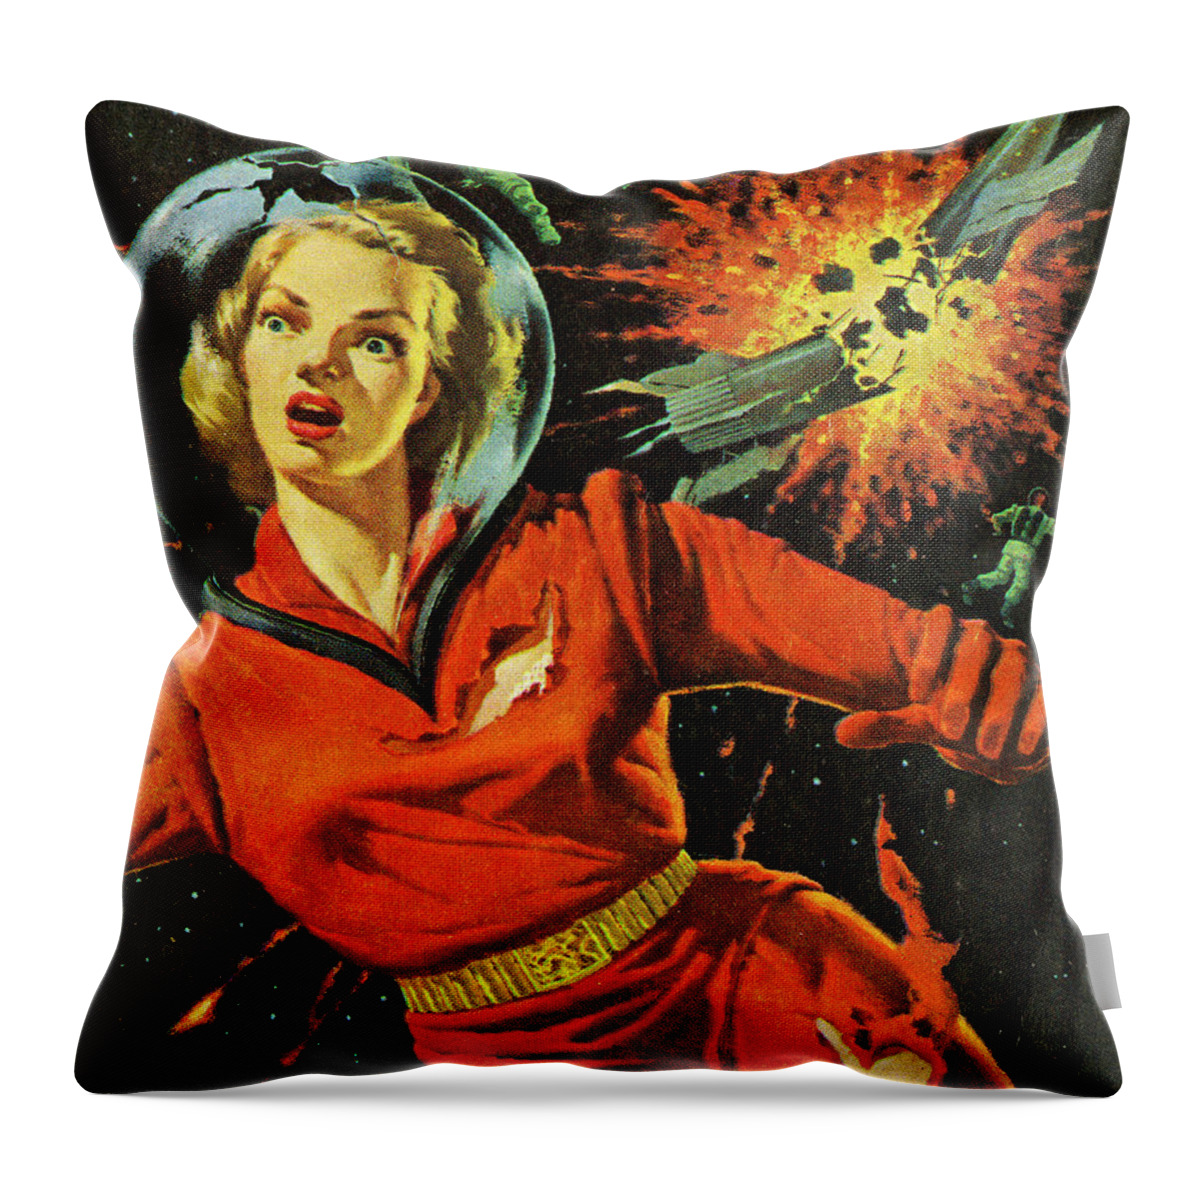 Adult Throw Pillow featuring the drawing Woman With Rocket Exploding by CSA Images